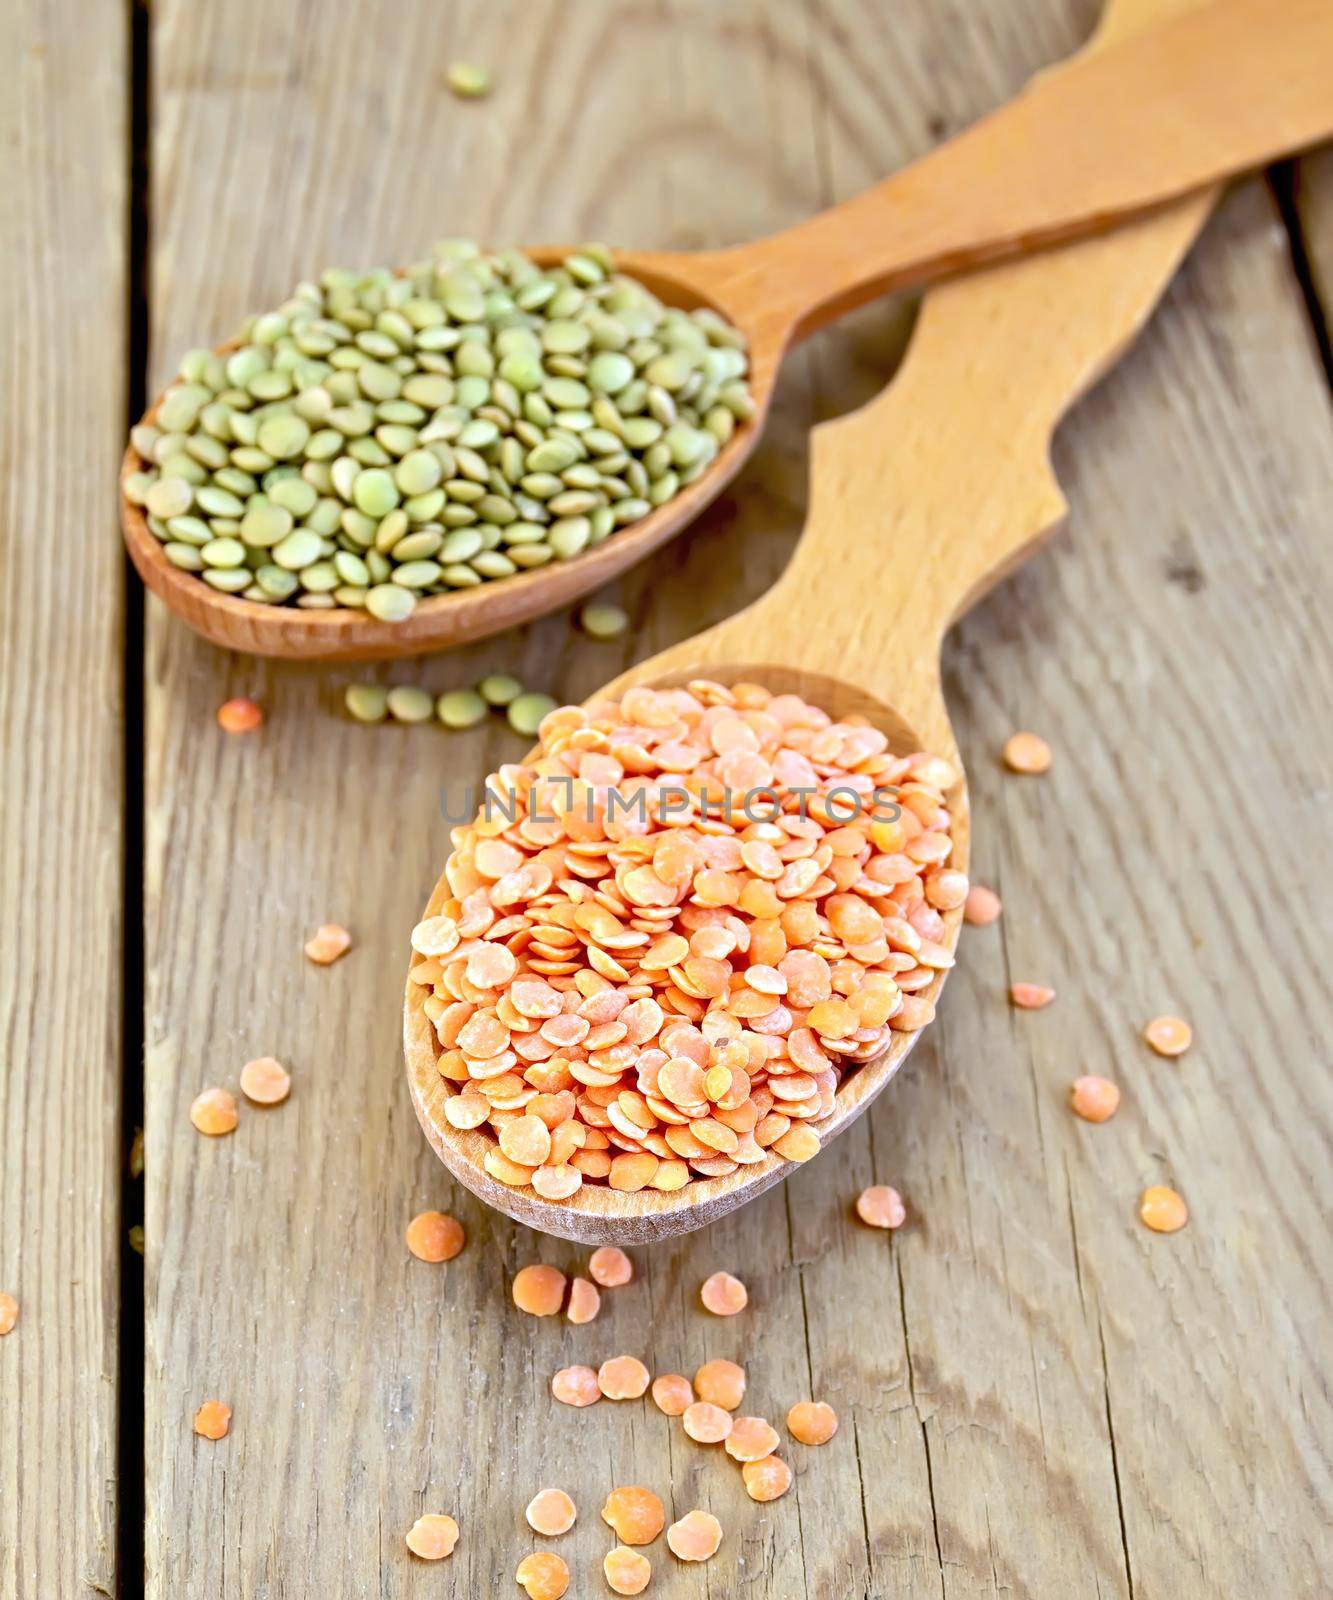 Lentils red and green in spoon on wooden board by rezkrr